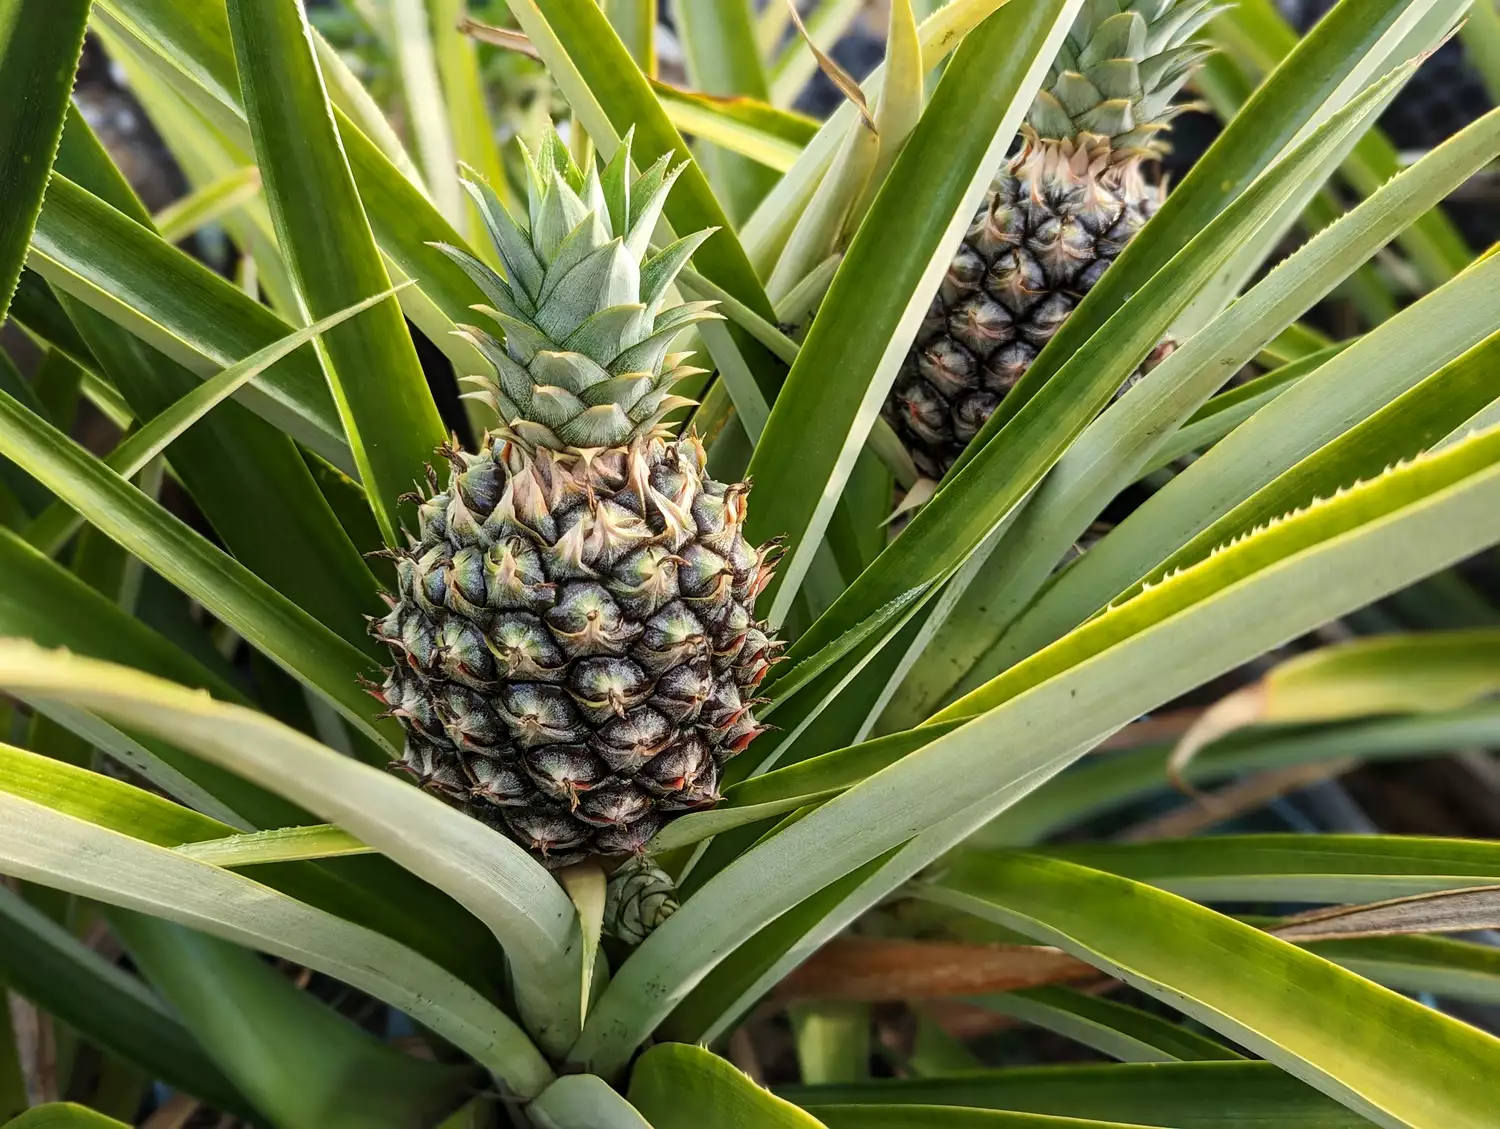 Growing pineapple in containers